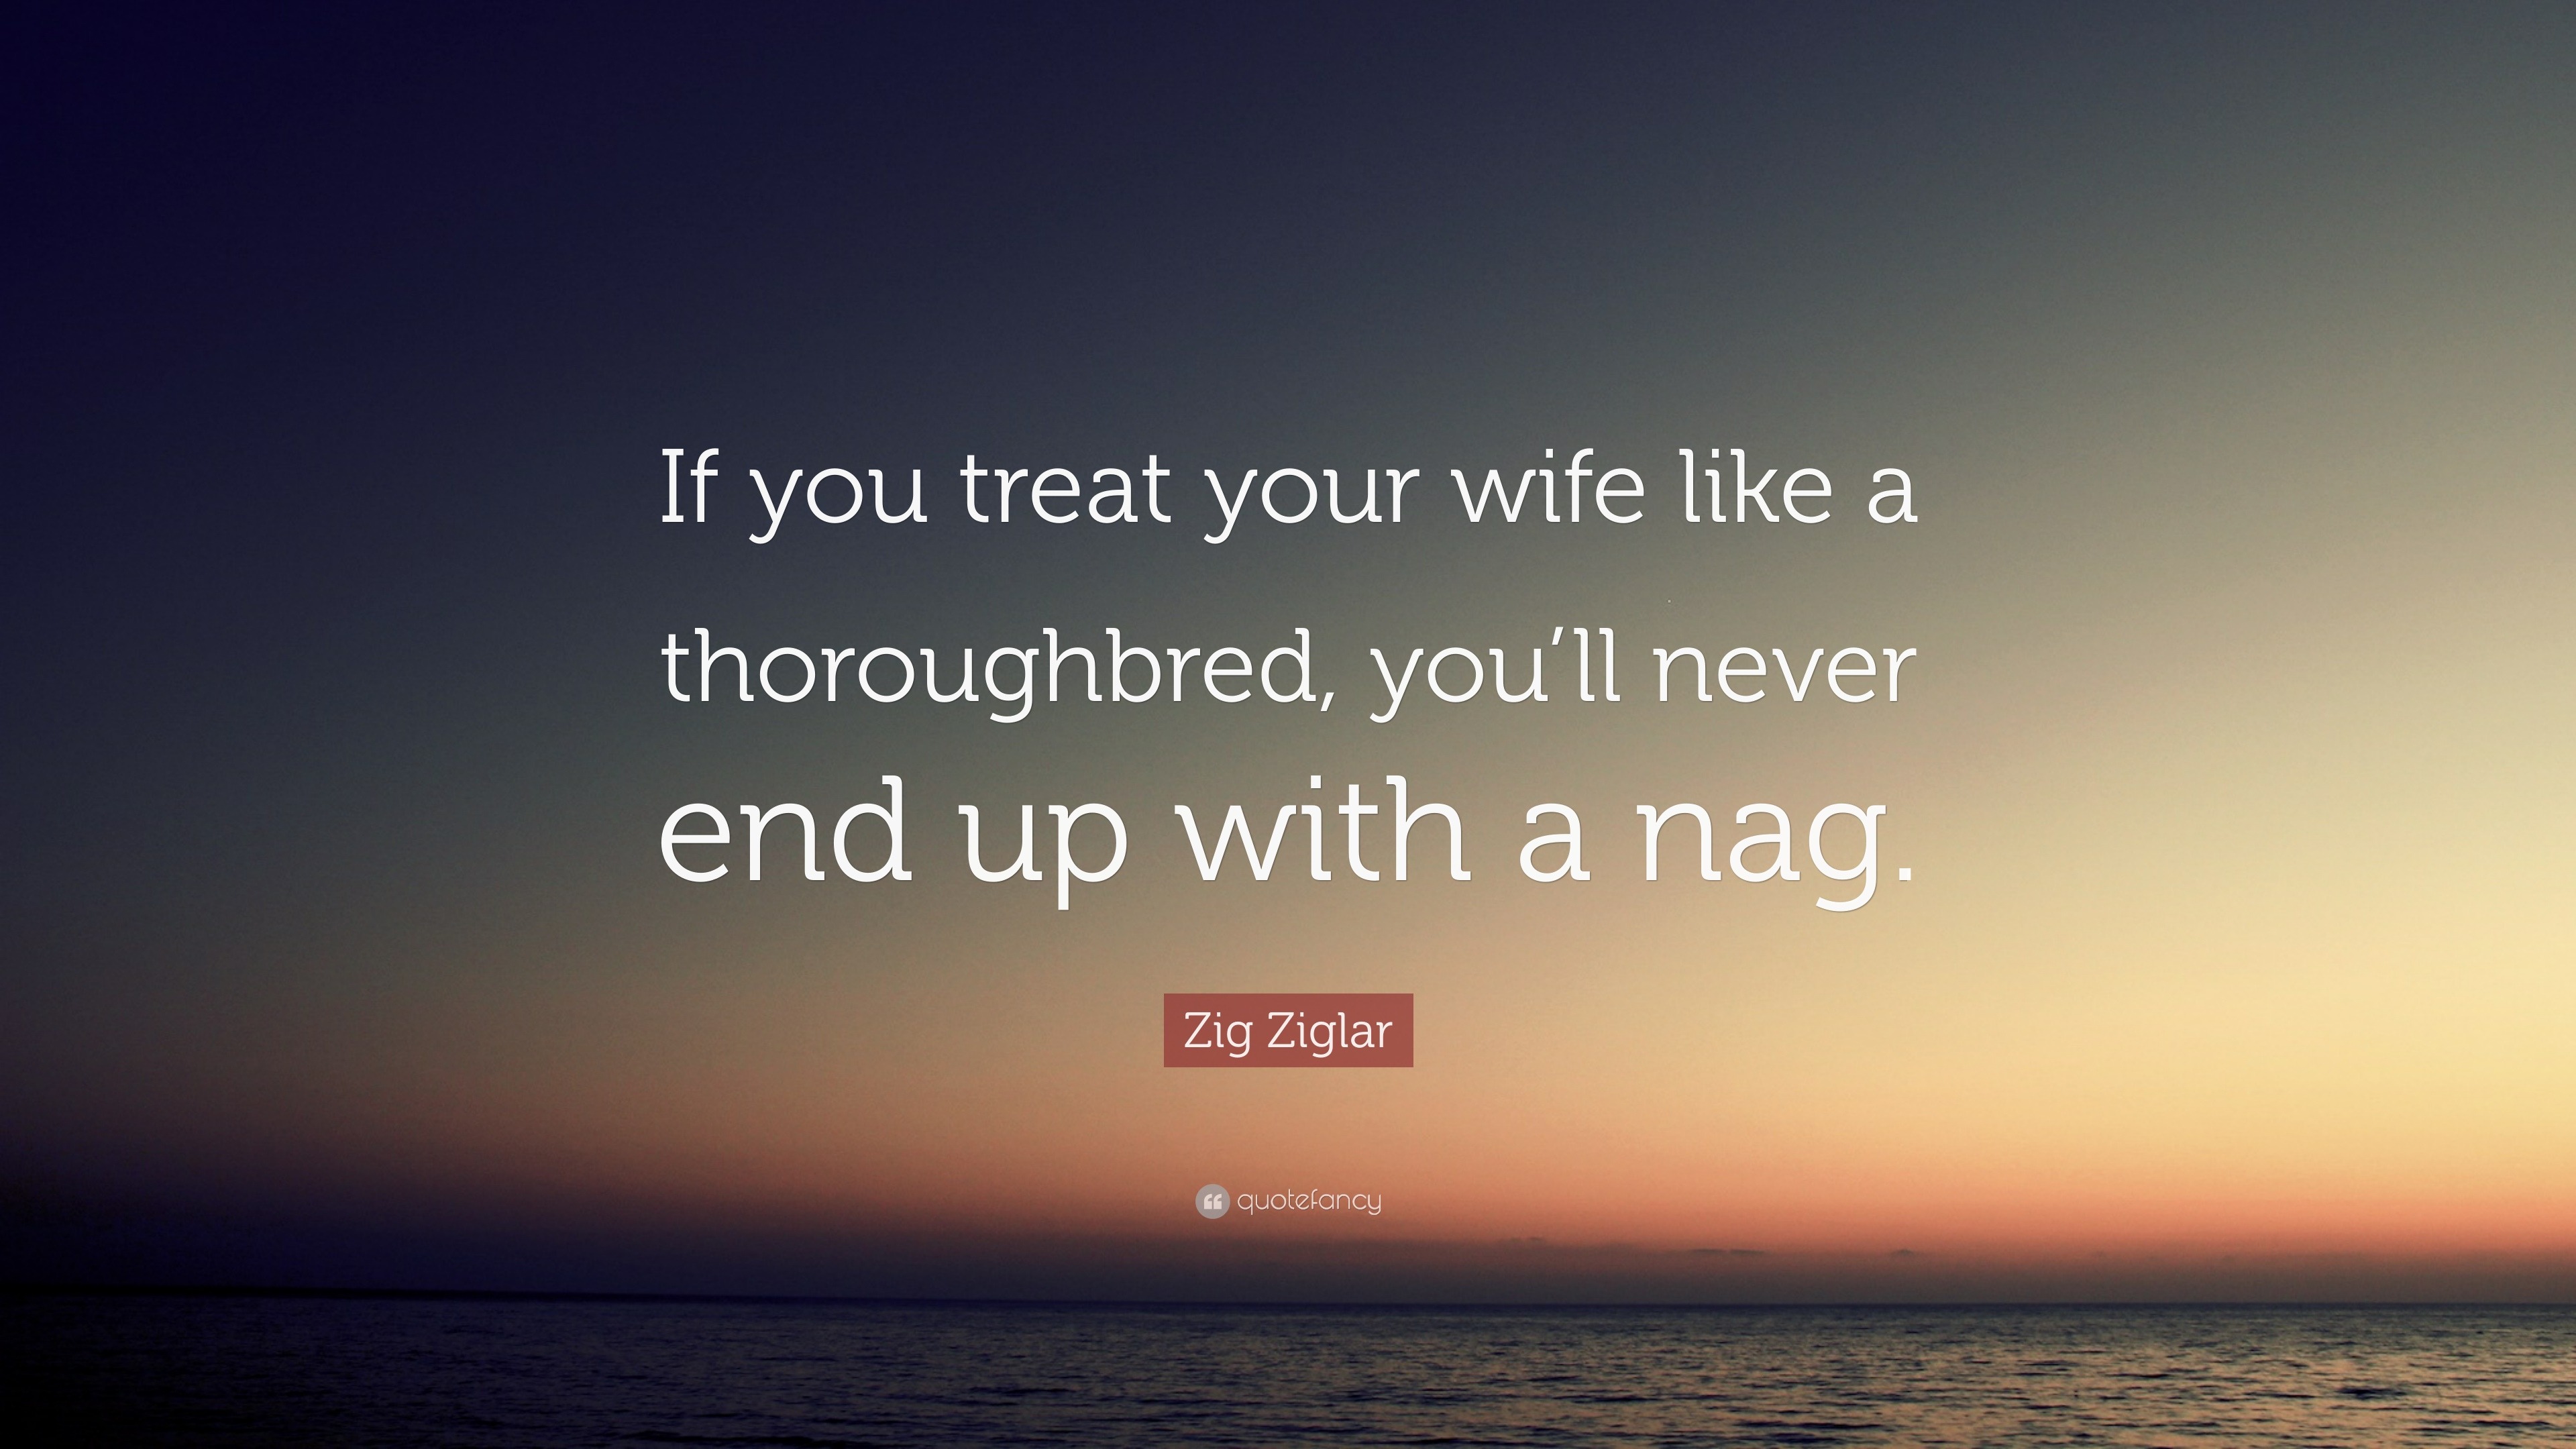 Zig Ziglar Quote: “If you treat your wife like a thoroughbred, you’ll ...